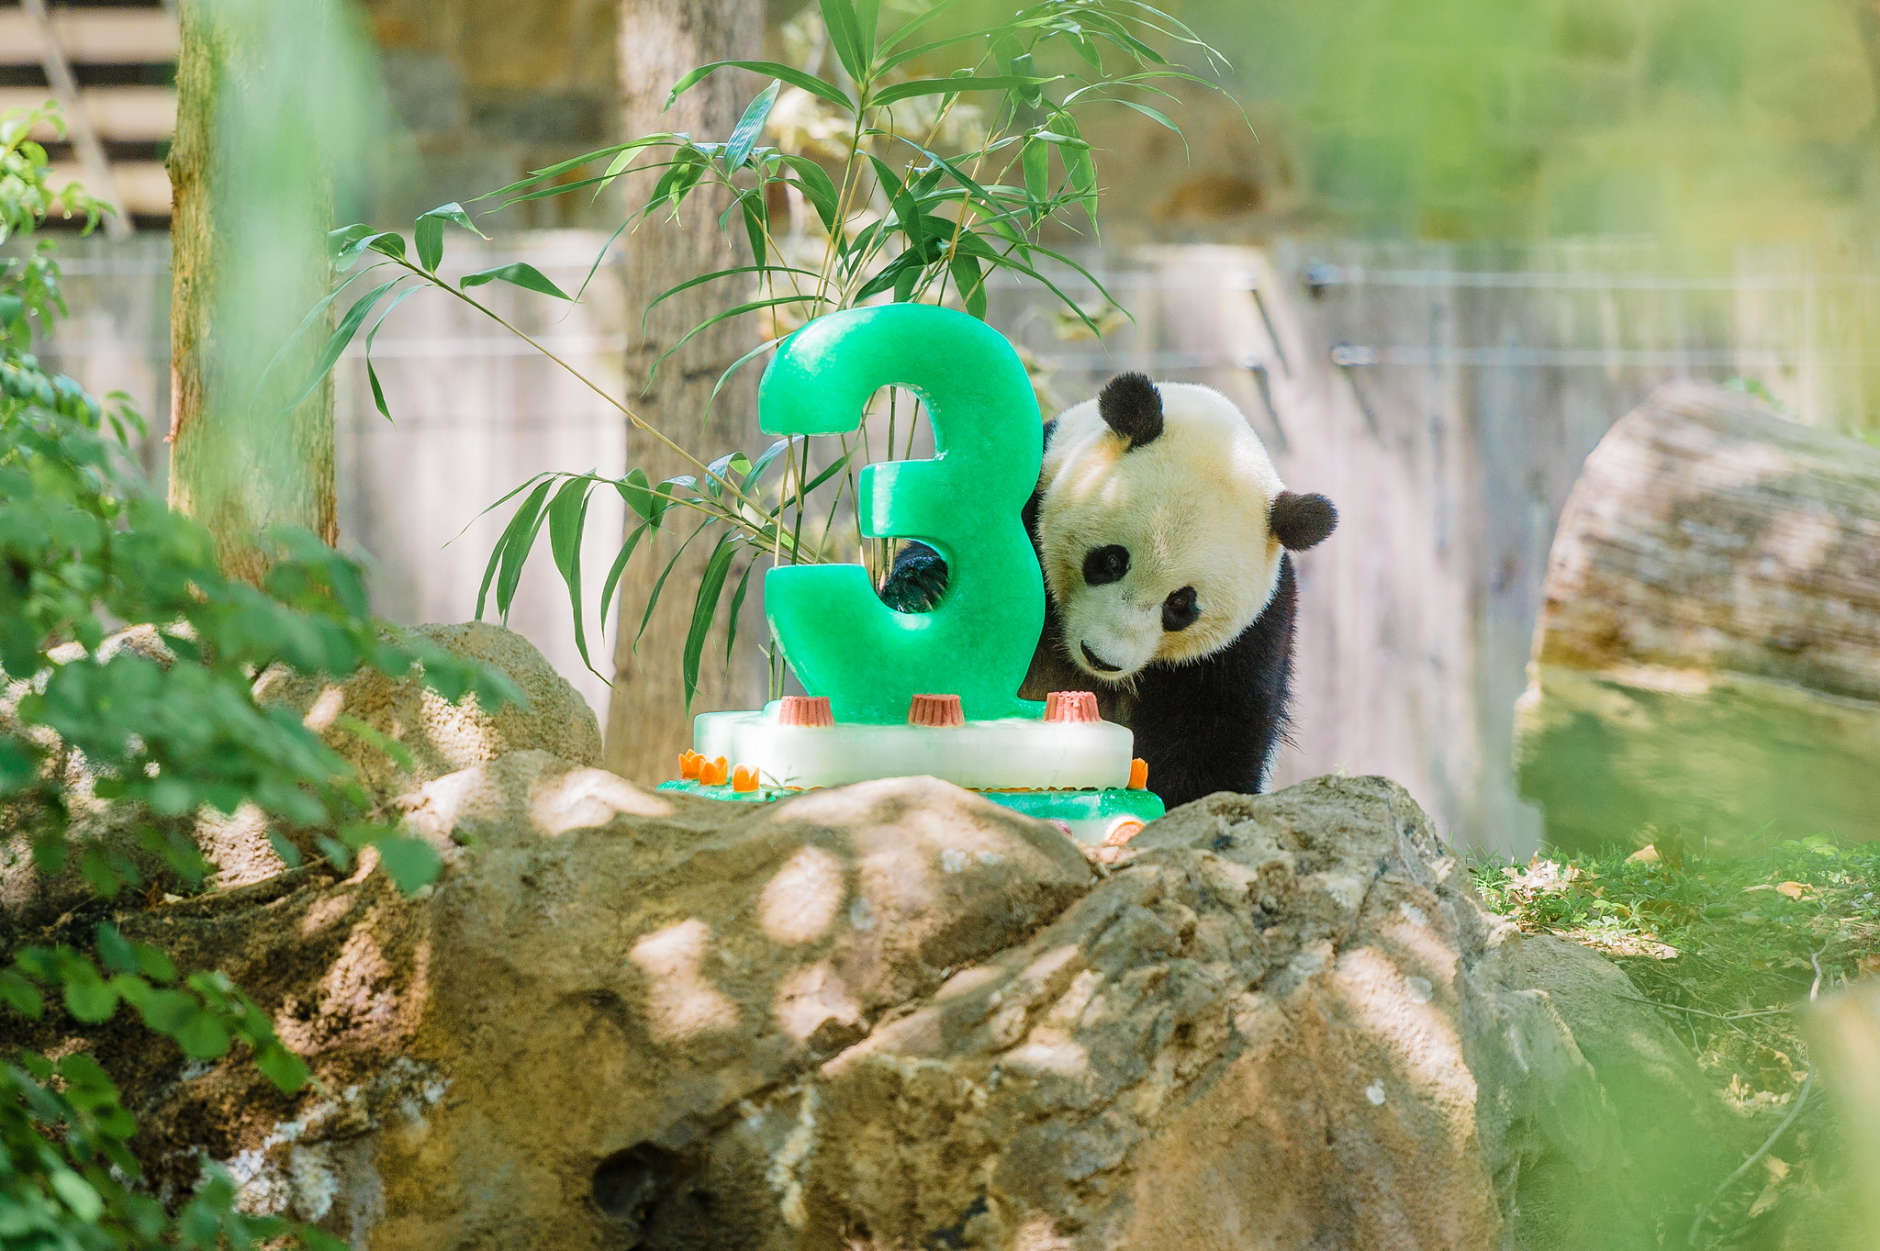 Bao Bao turned three years old on August 23, 2016. It was predetermined once she reached this age she would be returned to China as part of a contractual agreement. (Courtesy Smithsonian National Zoo)